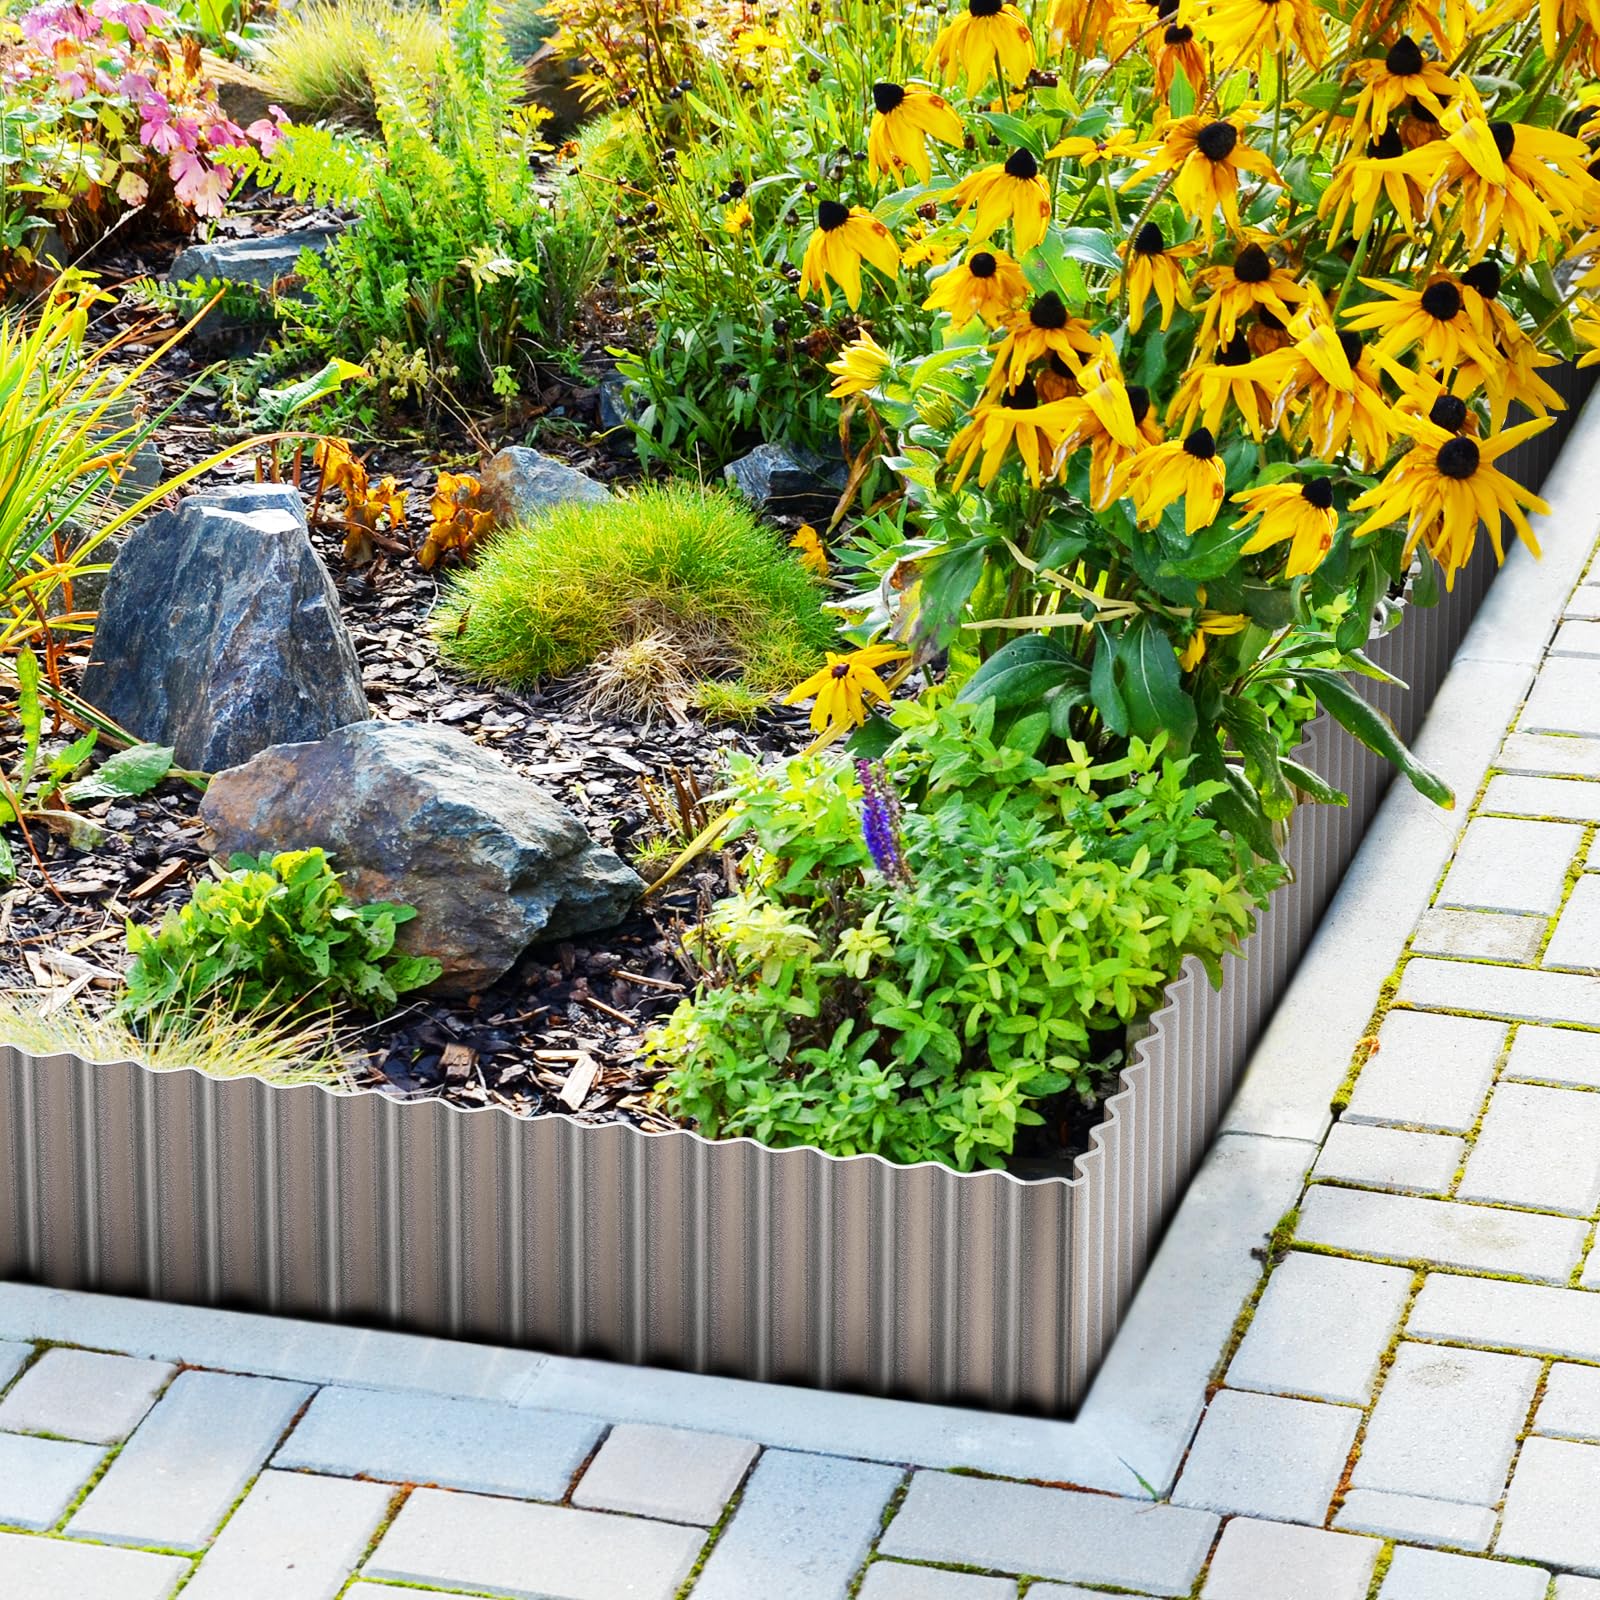 LAVEVE Corrugated Metal Garden Edging - Sturdy Border Perfect for DIY Flower Beds and Landscaping Borders (Silver, 8 Inch x 20FT)